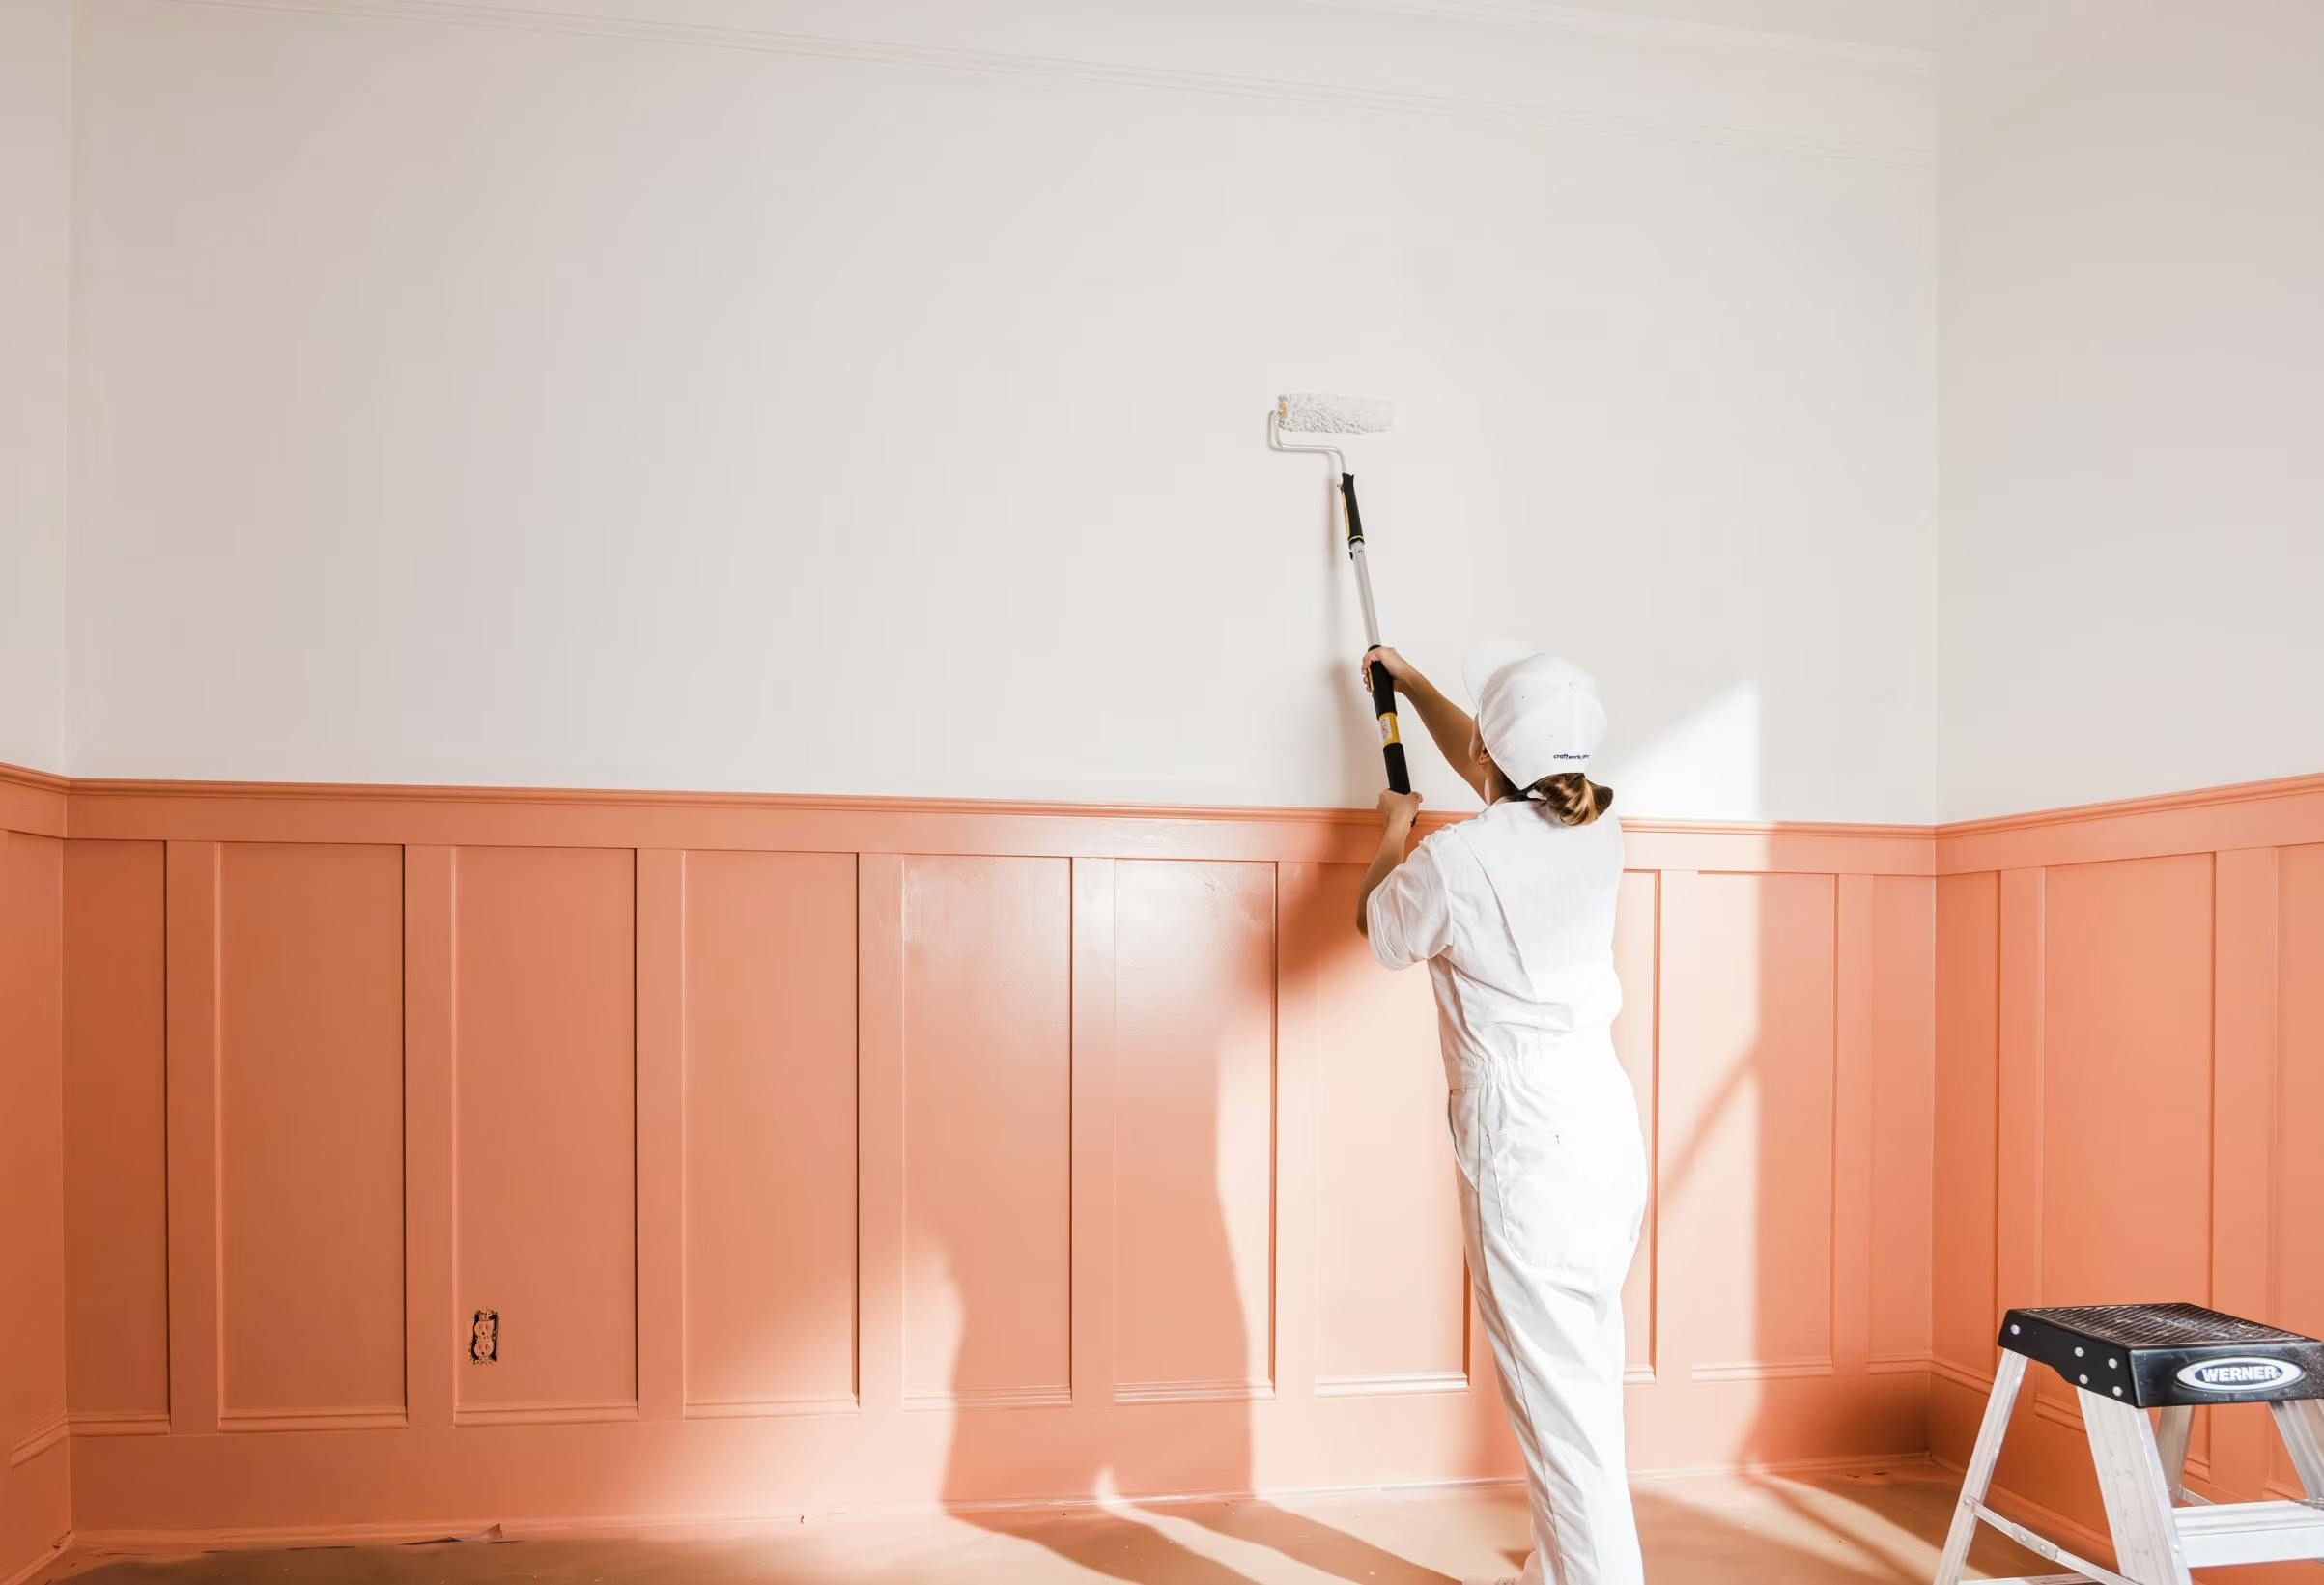 Craftwork painter painting a white wall with pink trim.